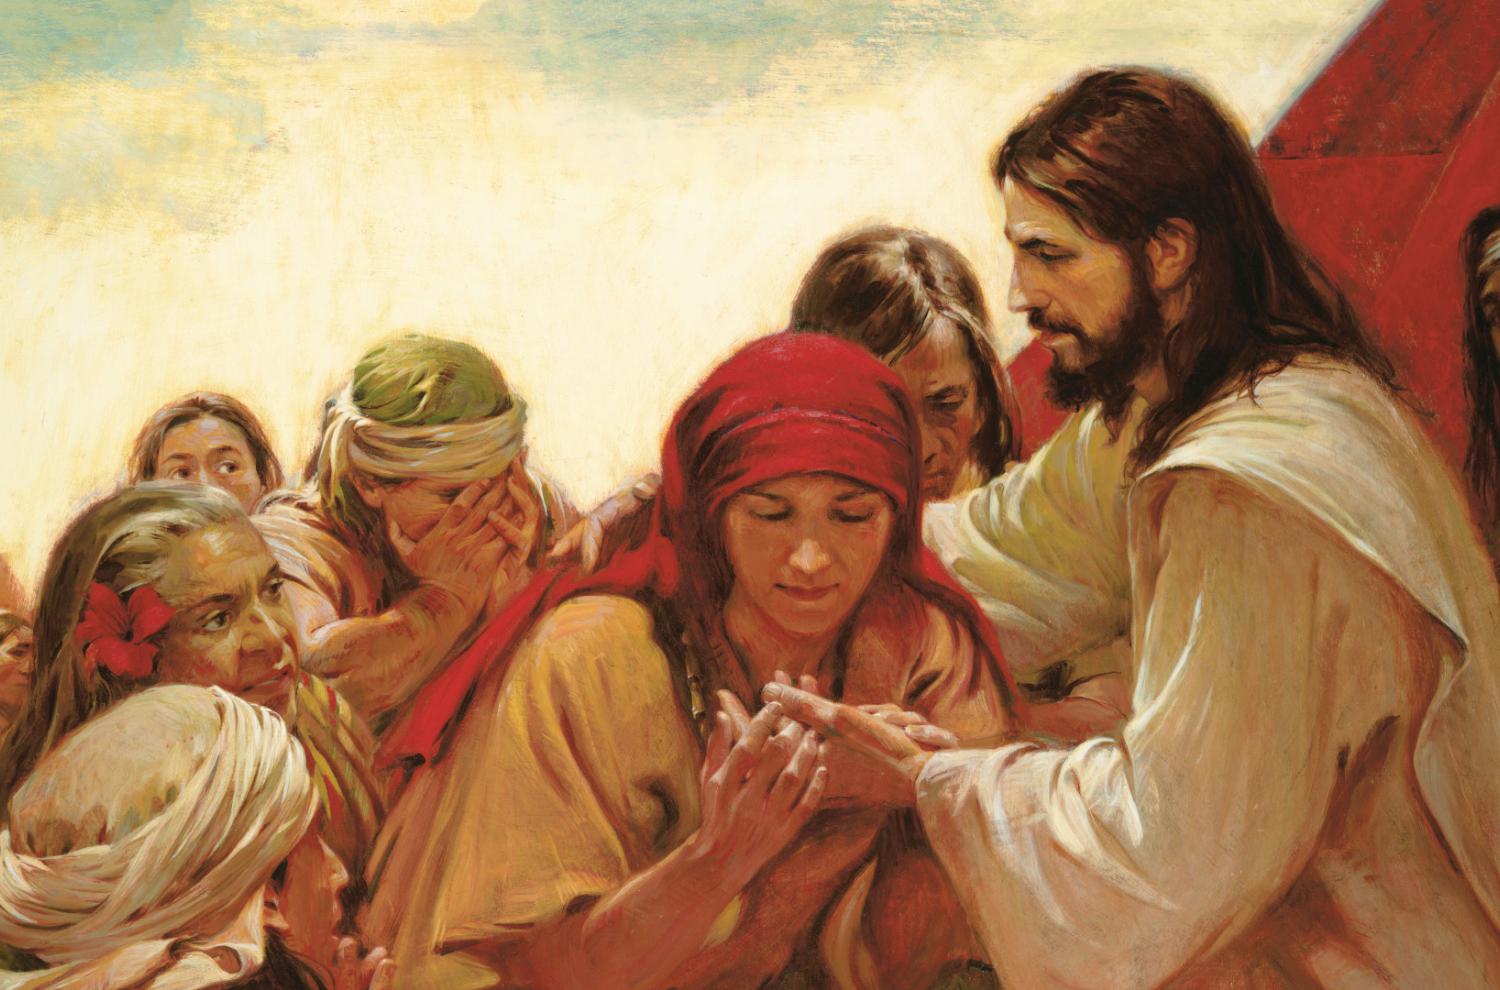 Christ shows the wounds from his crucifixion to people in the Americas in this painting titled “One by One” by Walter Rane.